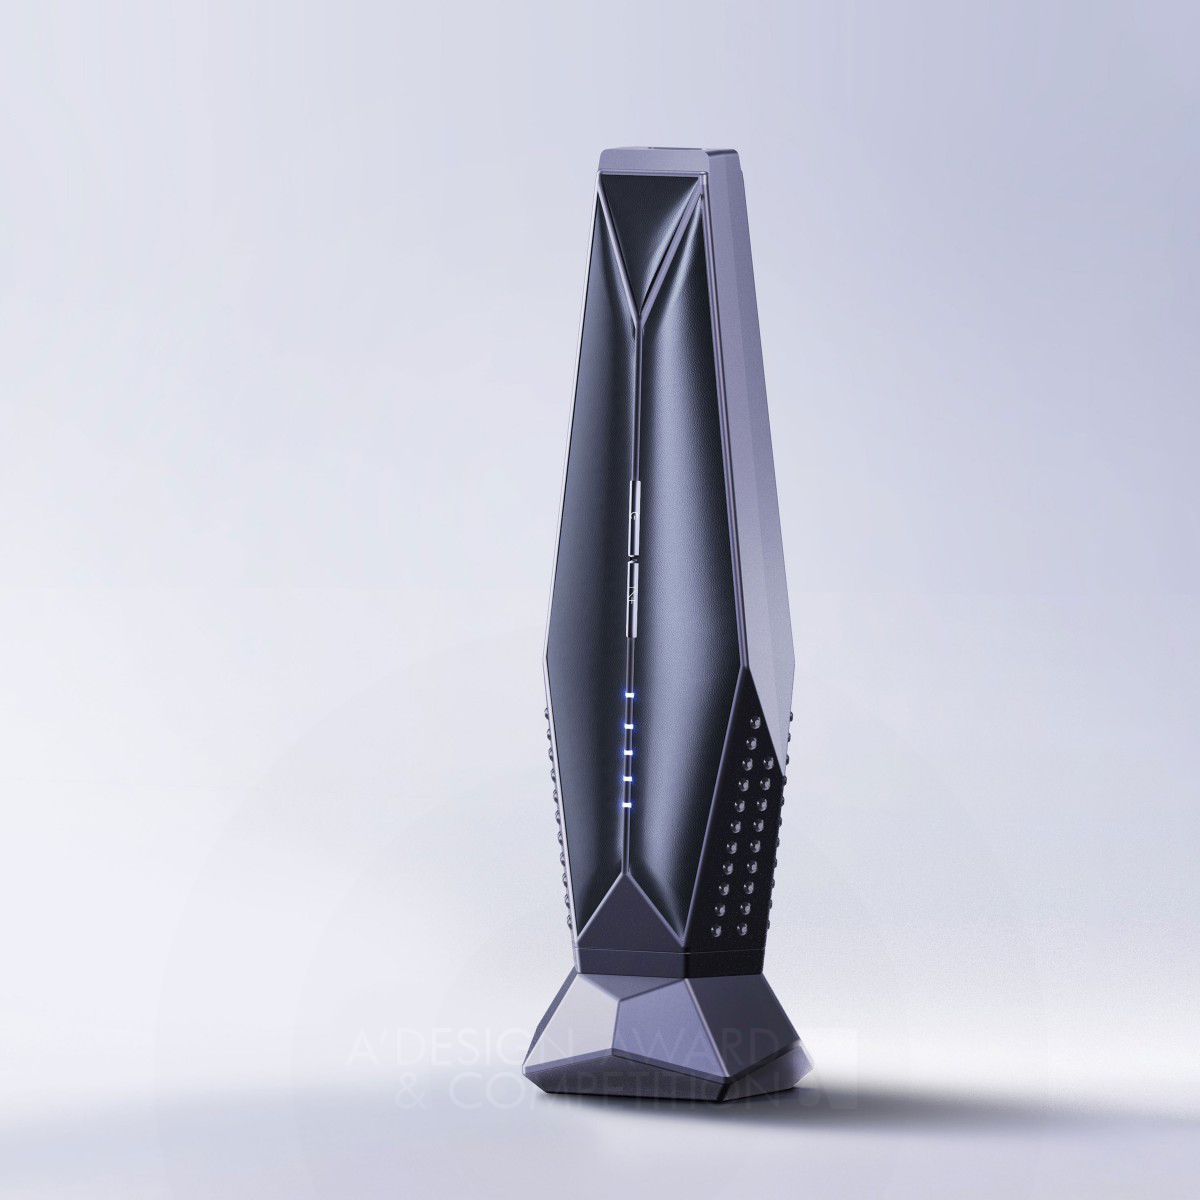 Fimon Radio Frequency Meter Beauty Instrument by Ningbo Dechang Electric Machinery Co, Ltd Iron Beauty, Personal Care and Cosmetic Products Design Award Winner 2024 